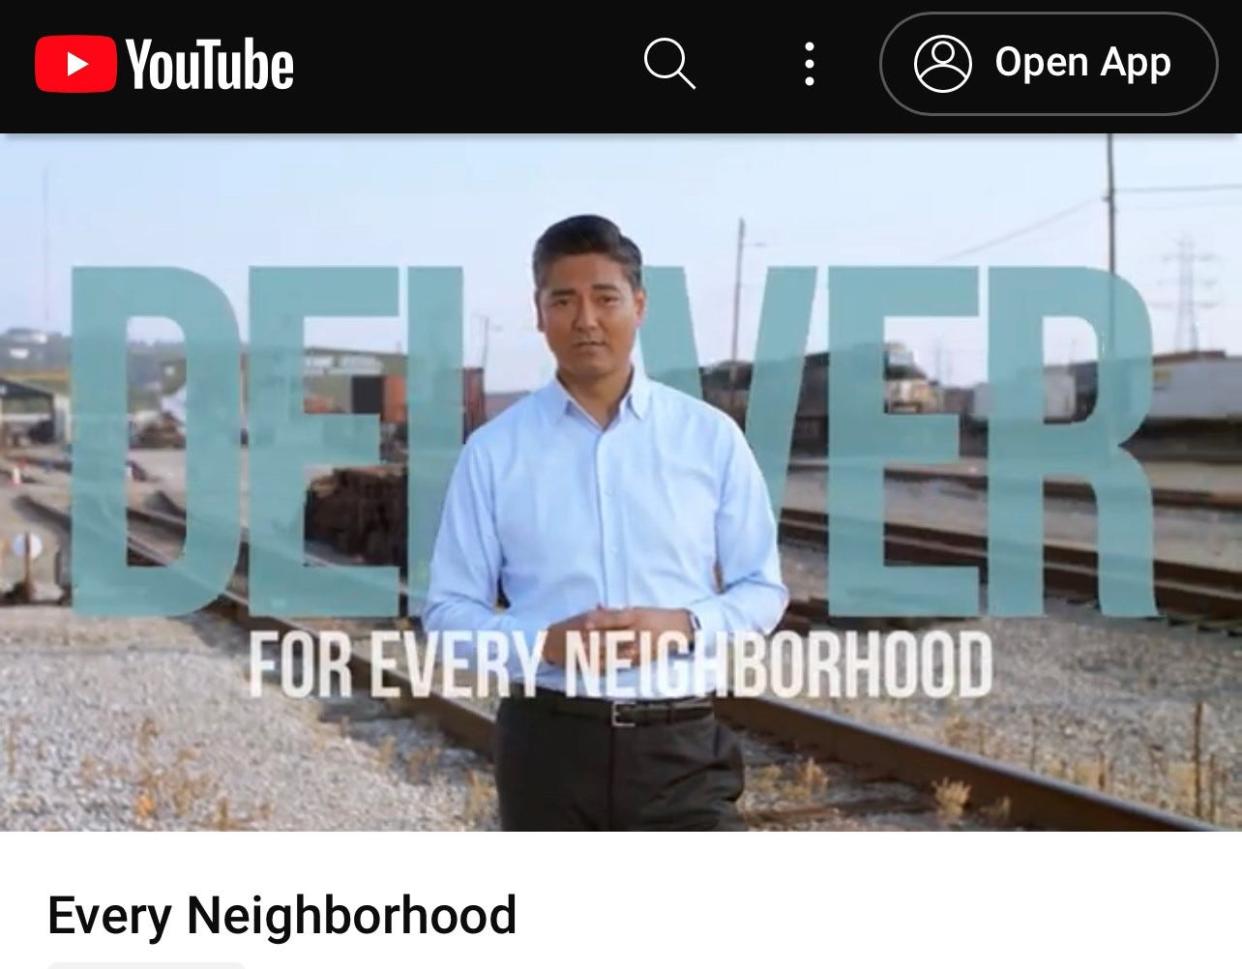 Image from a political campaign commercial starring Cincinnati Mayor Aftab Pureval which promises investments from railroad sale money into every neighborhood if voters vote yes on Issue 22.